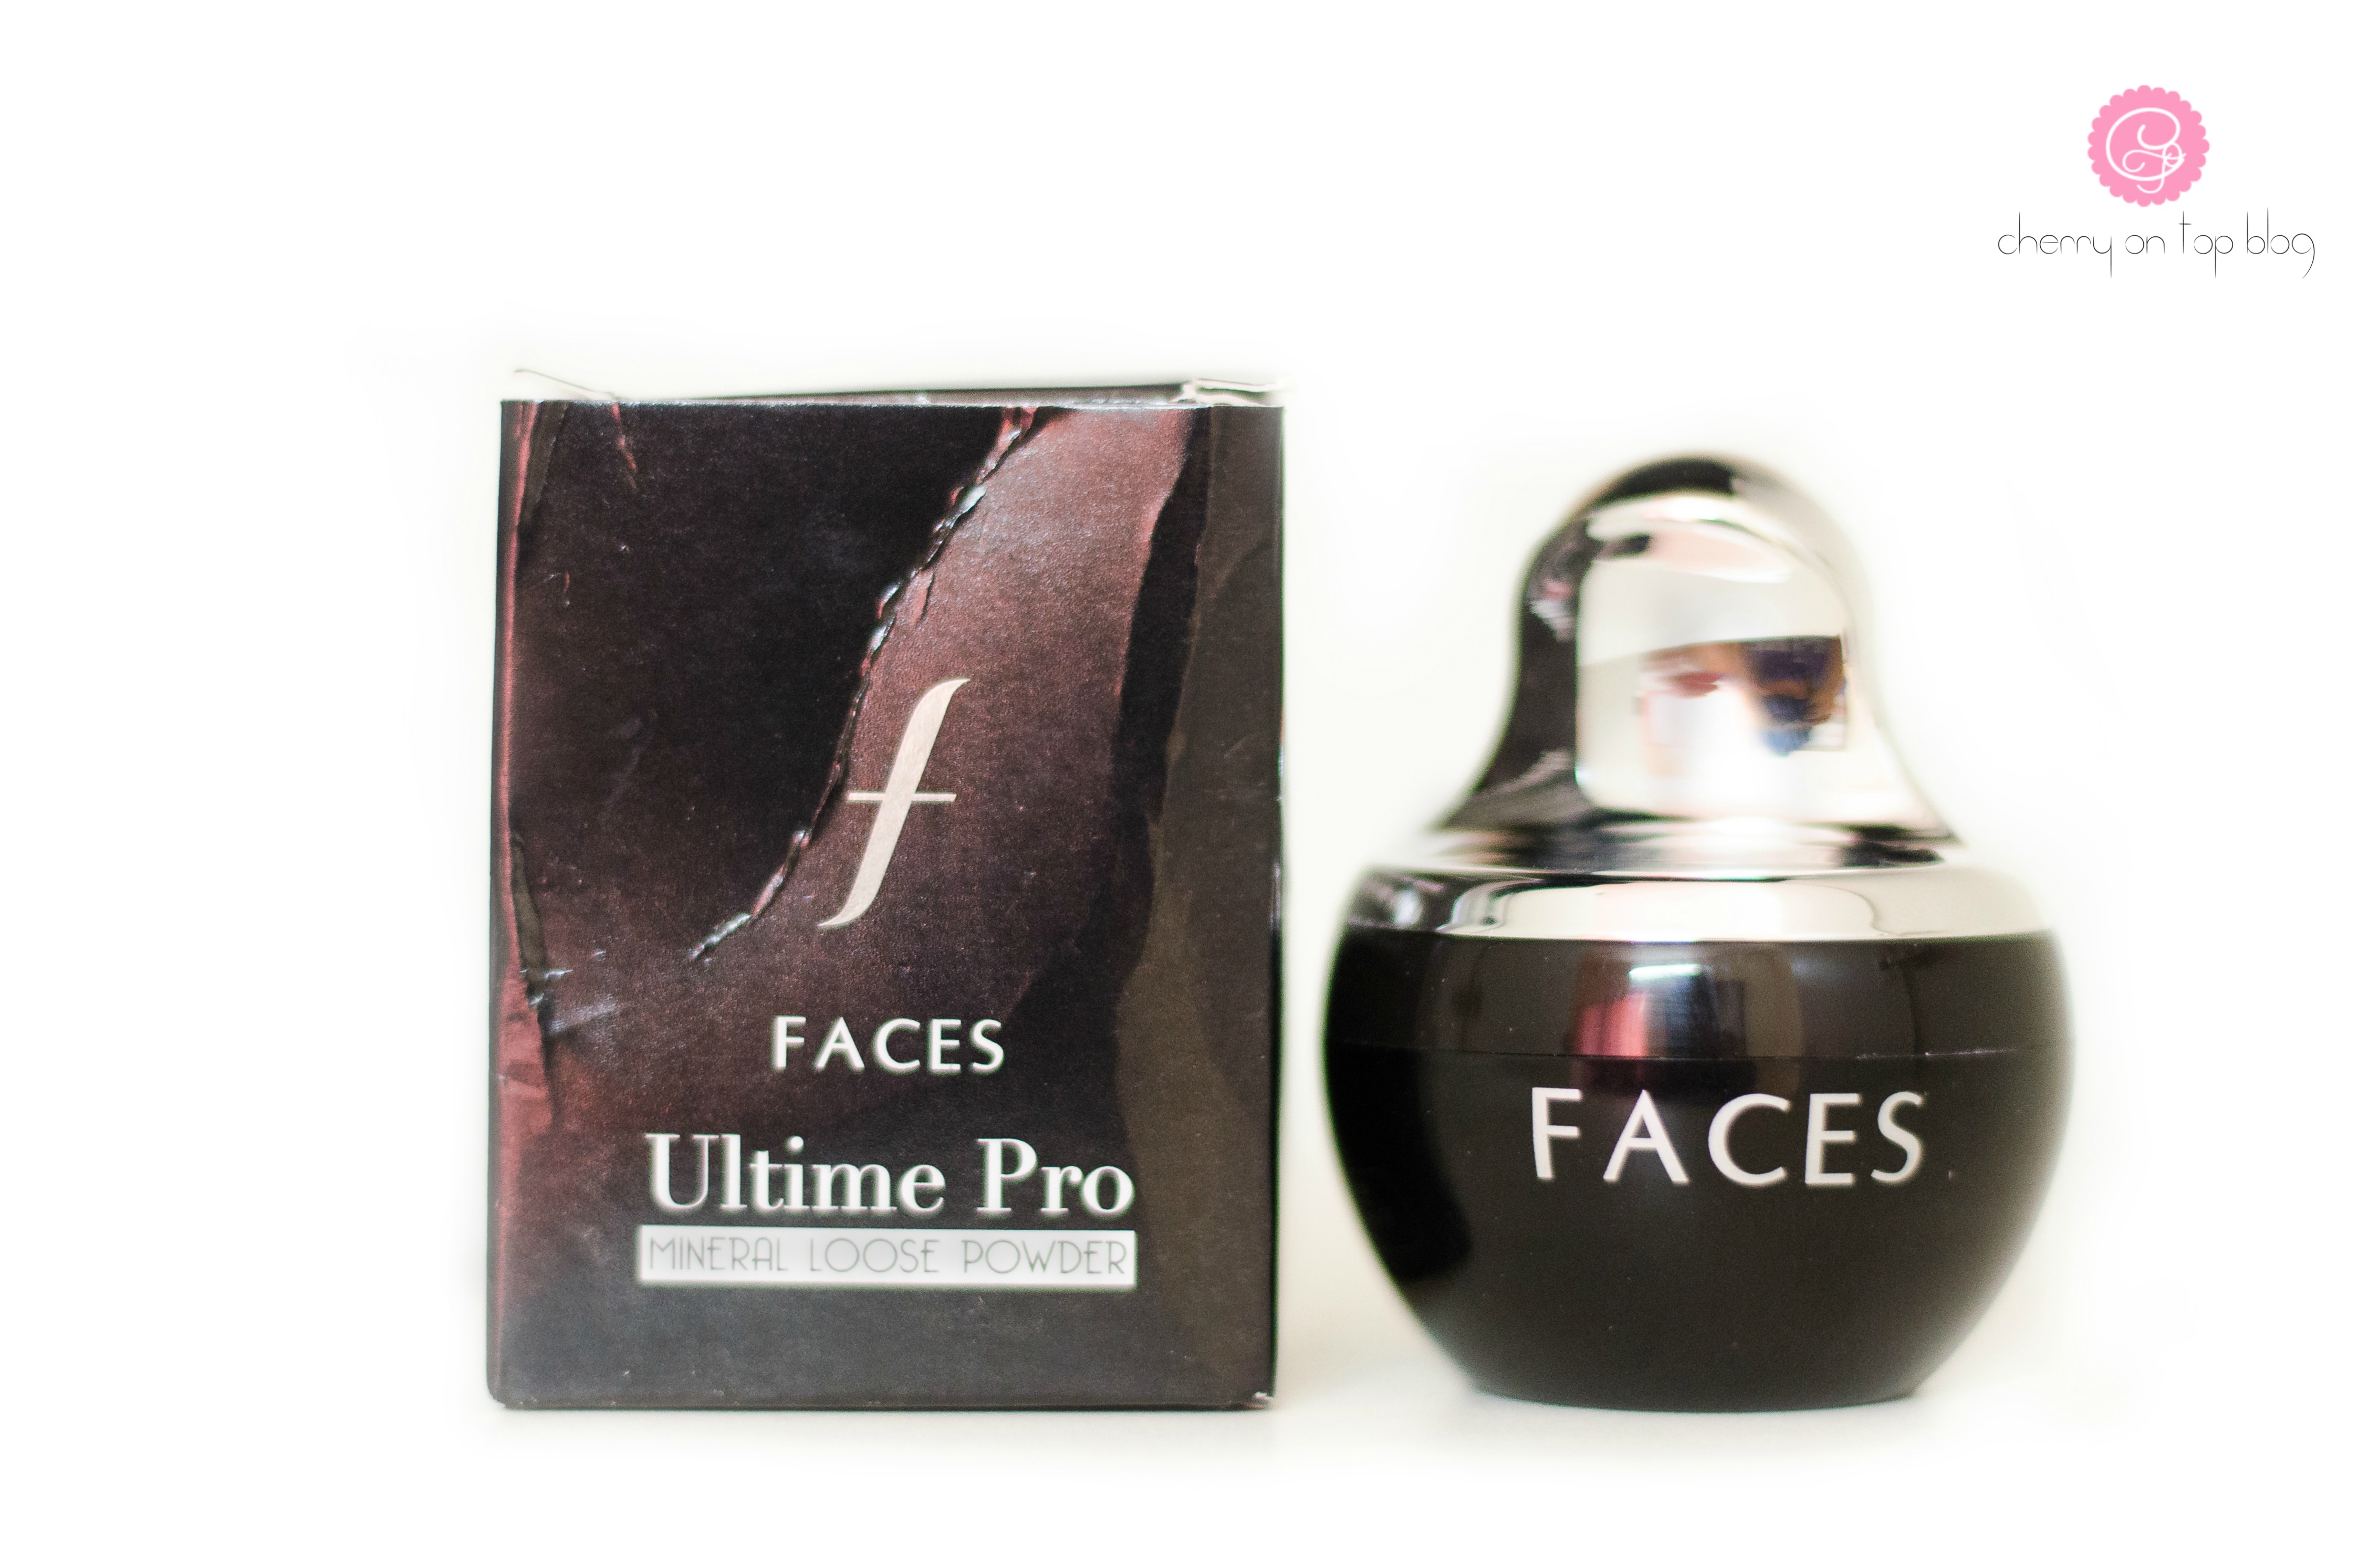 Faces Ultime Pro Mineral Loose Powder Review and Swatches | cherryontopblog.com